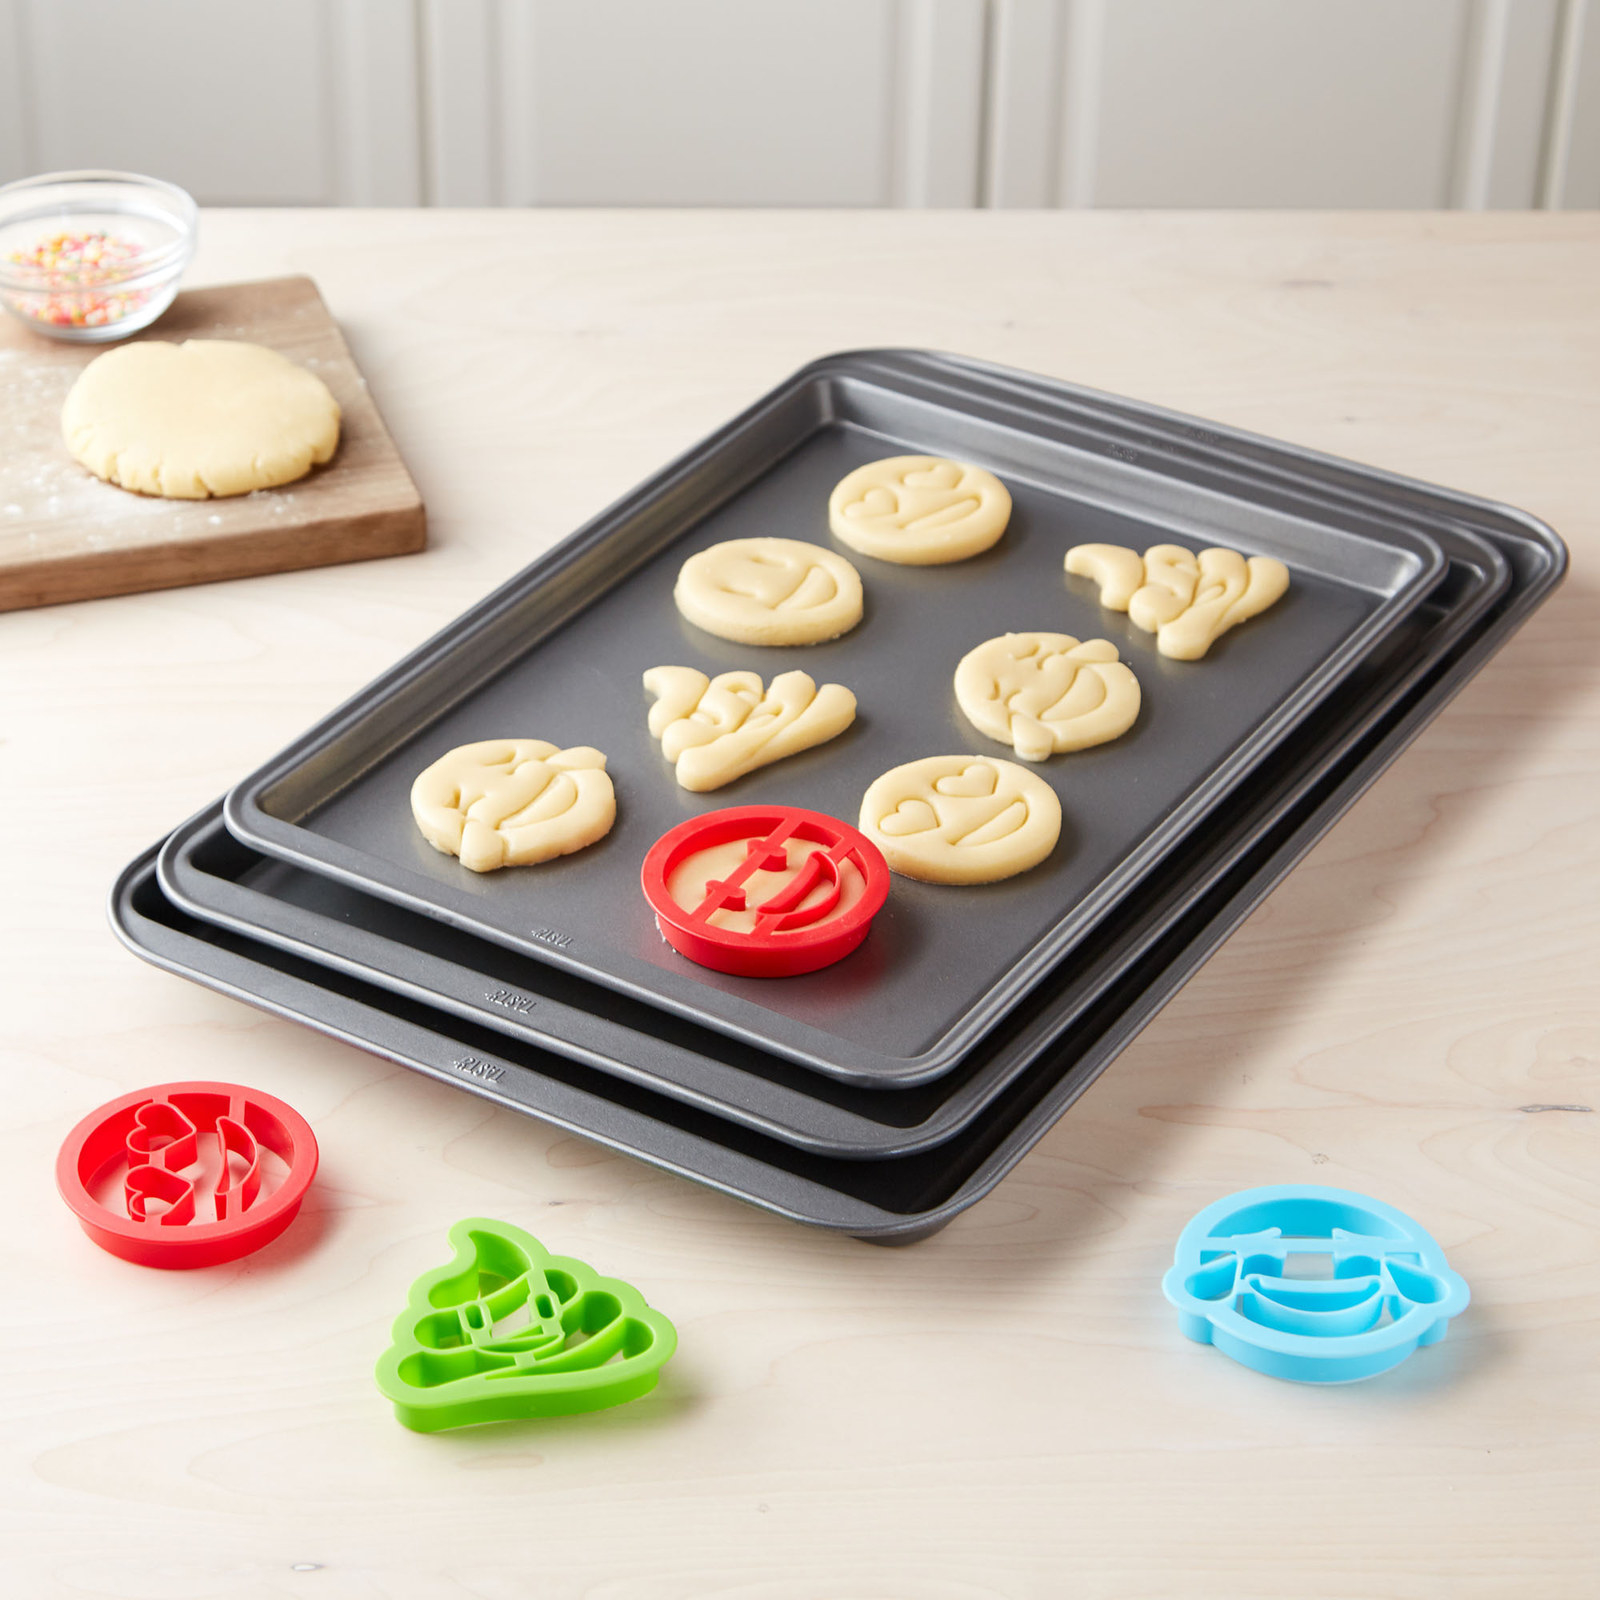 27 Fun Kitchen Tools And Gadgets You Can Use With Your Kids